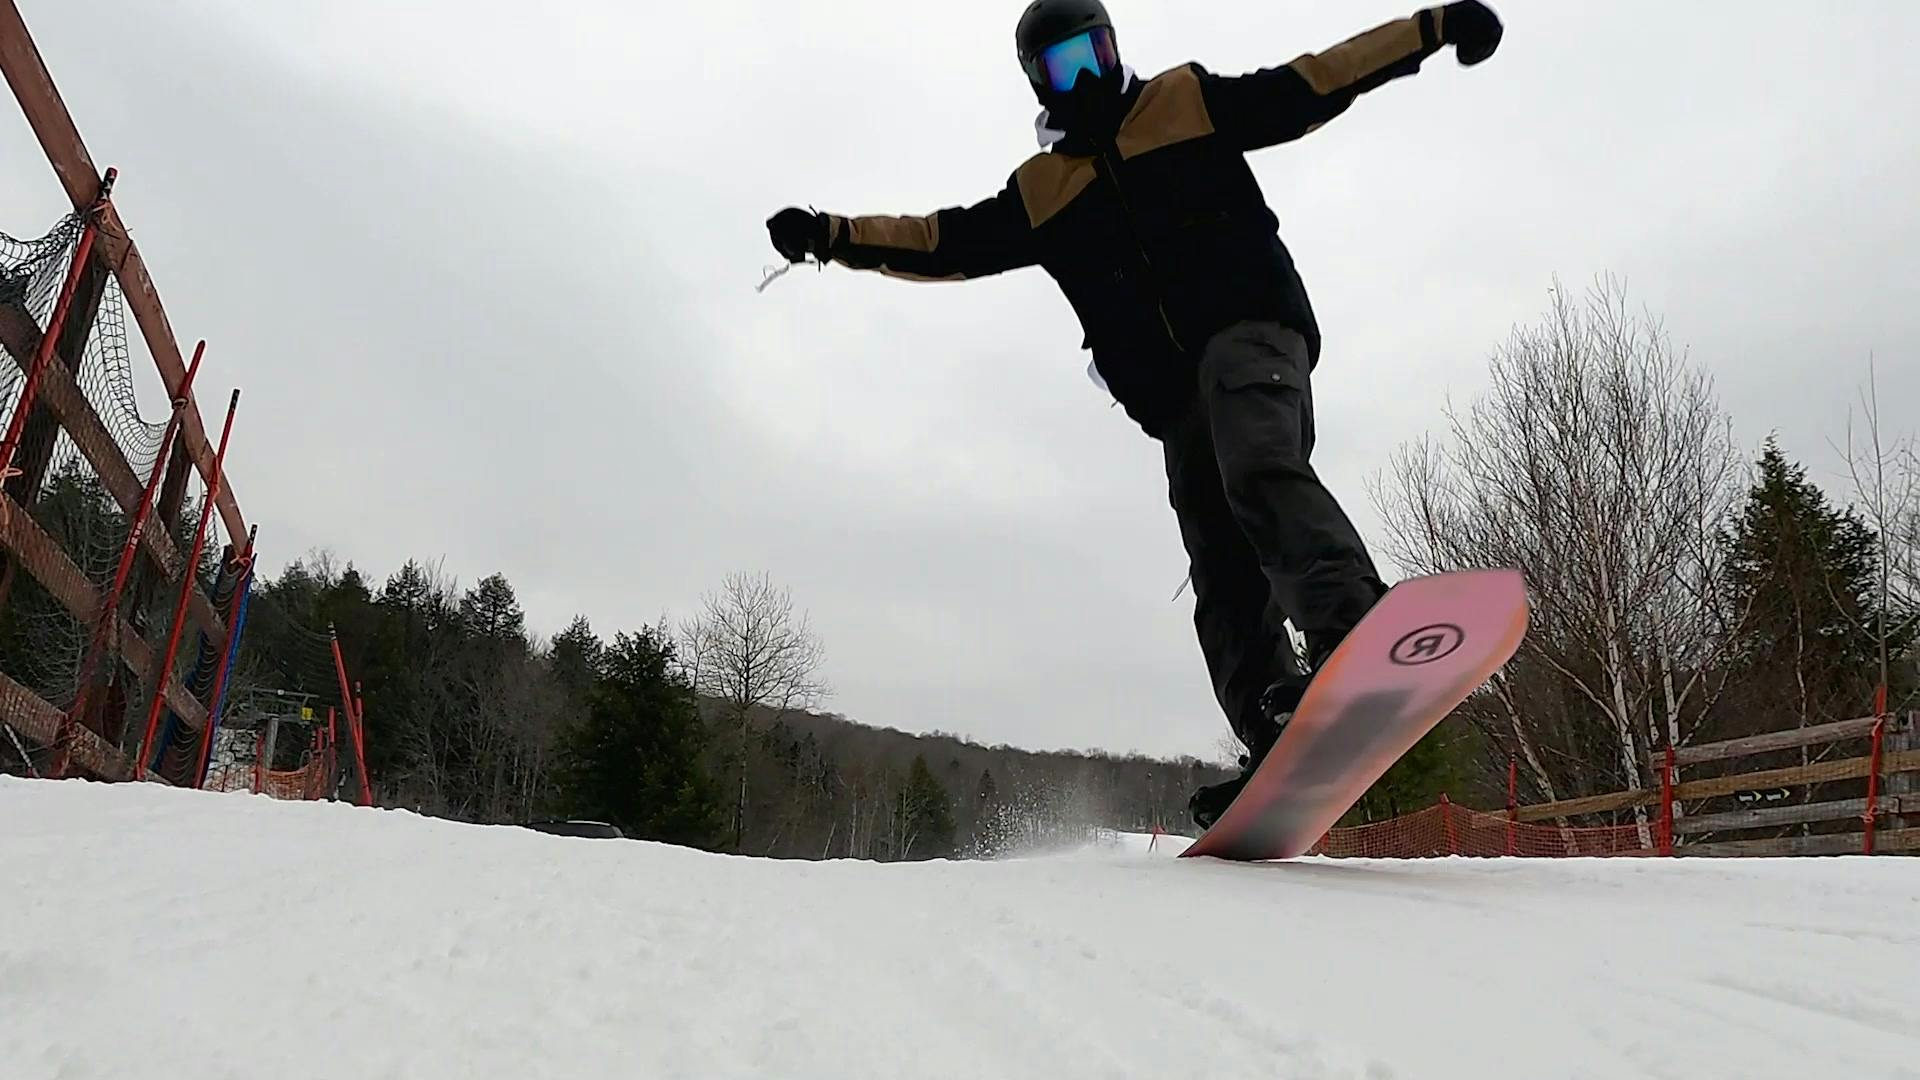 Curated expert Colby starting a jump with his snowboard